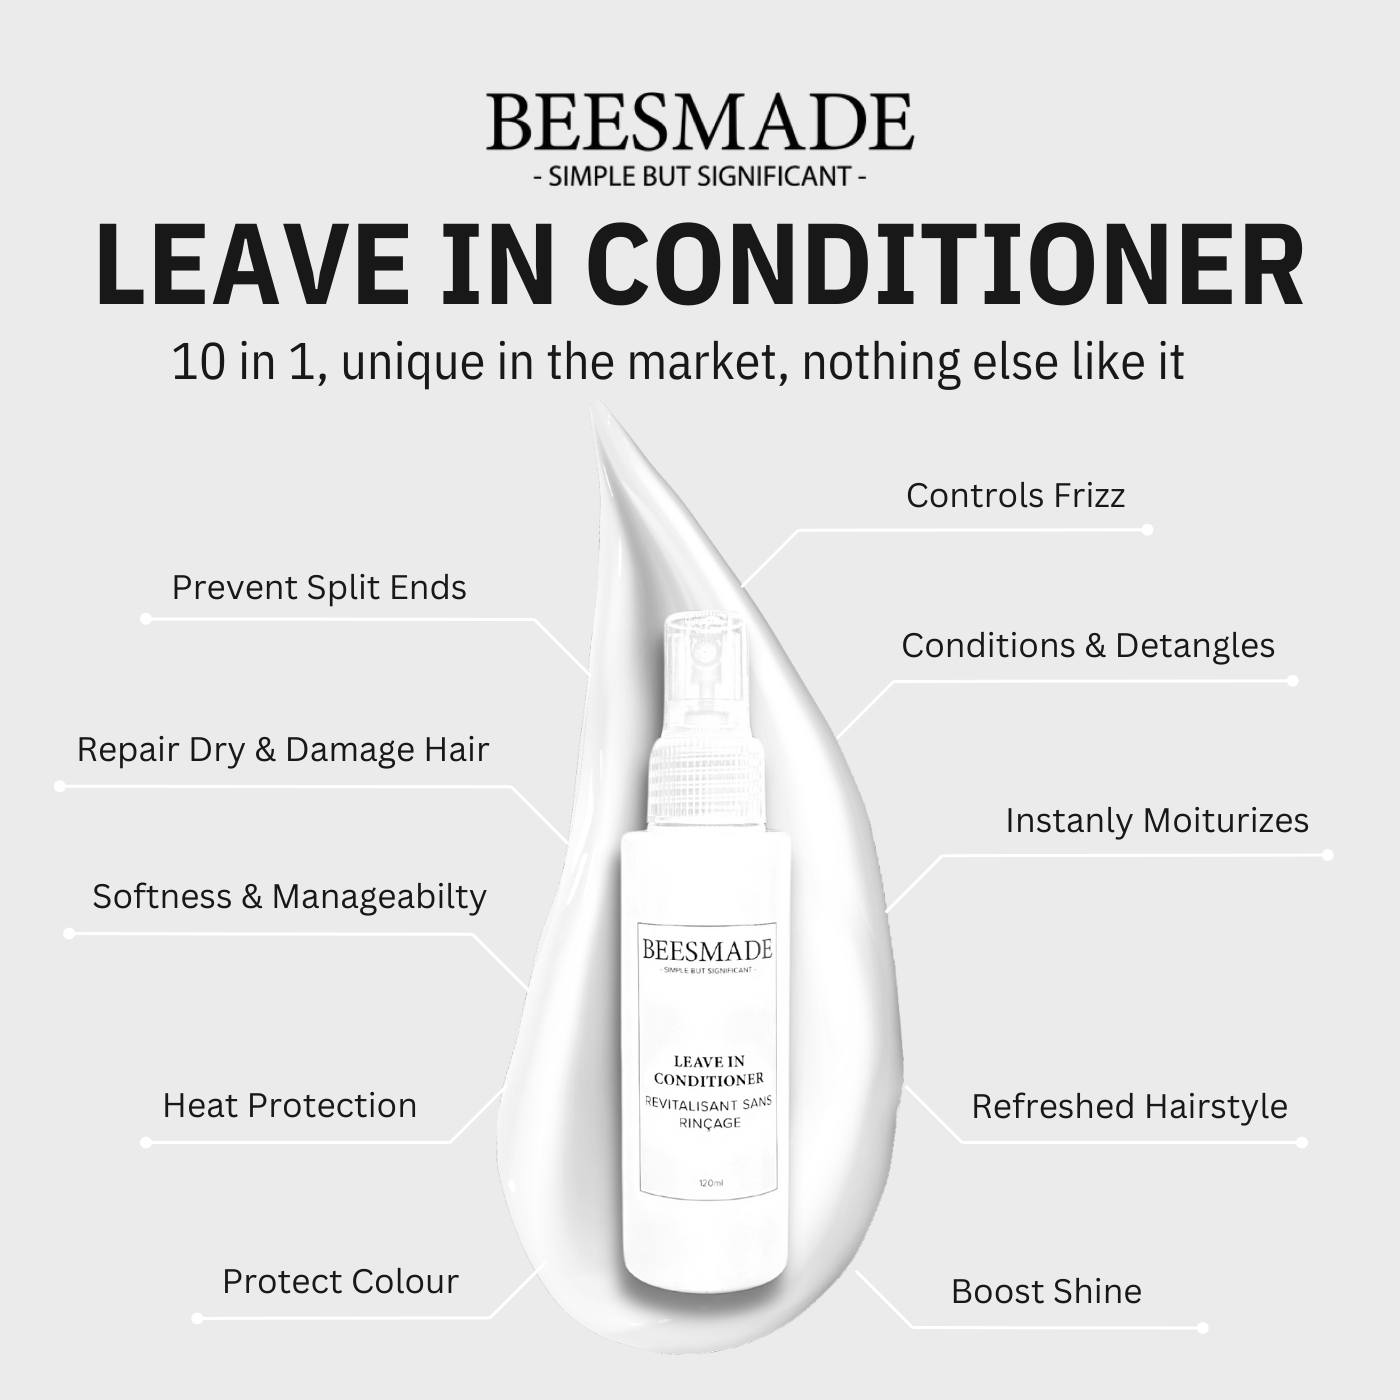 BEESMADE Leave in Conditioner 120ml - Detangling and Frizz Fighting